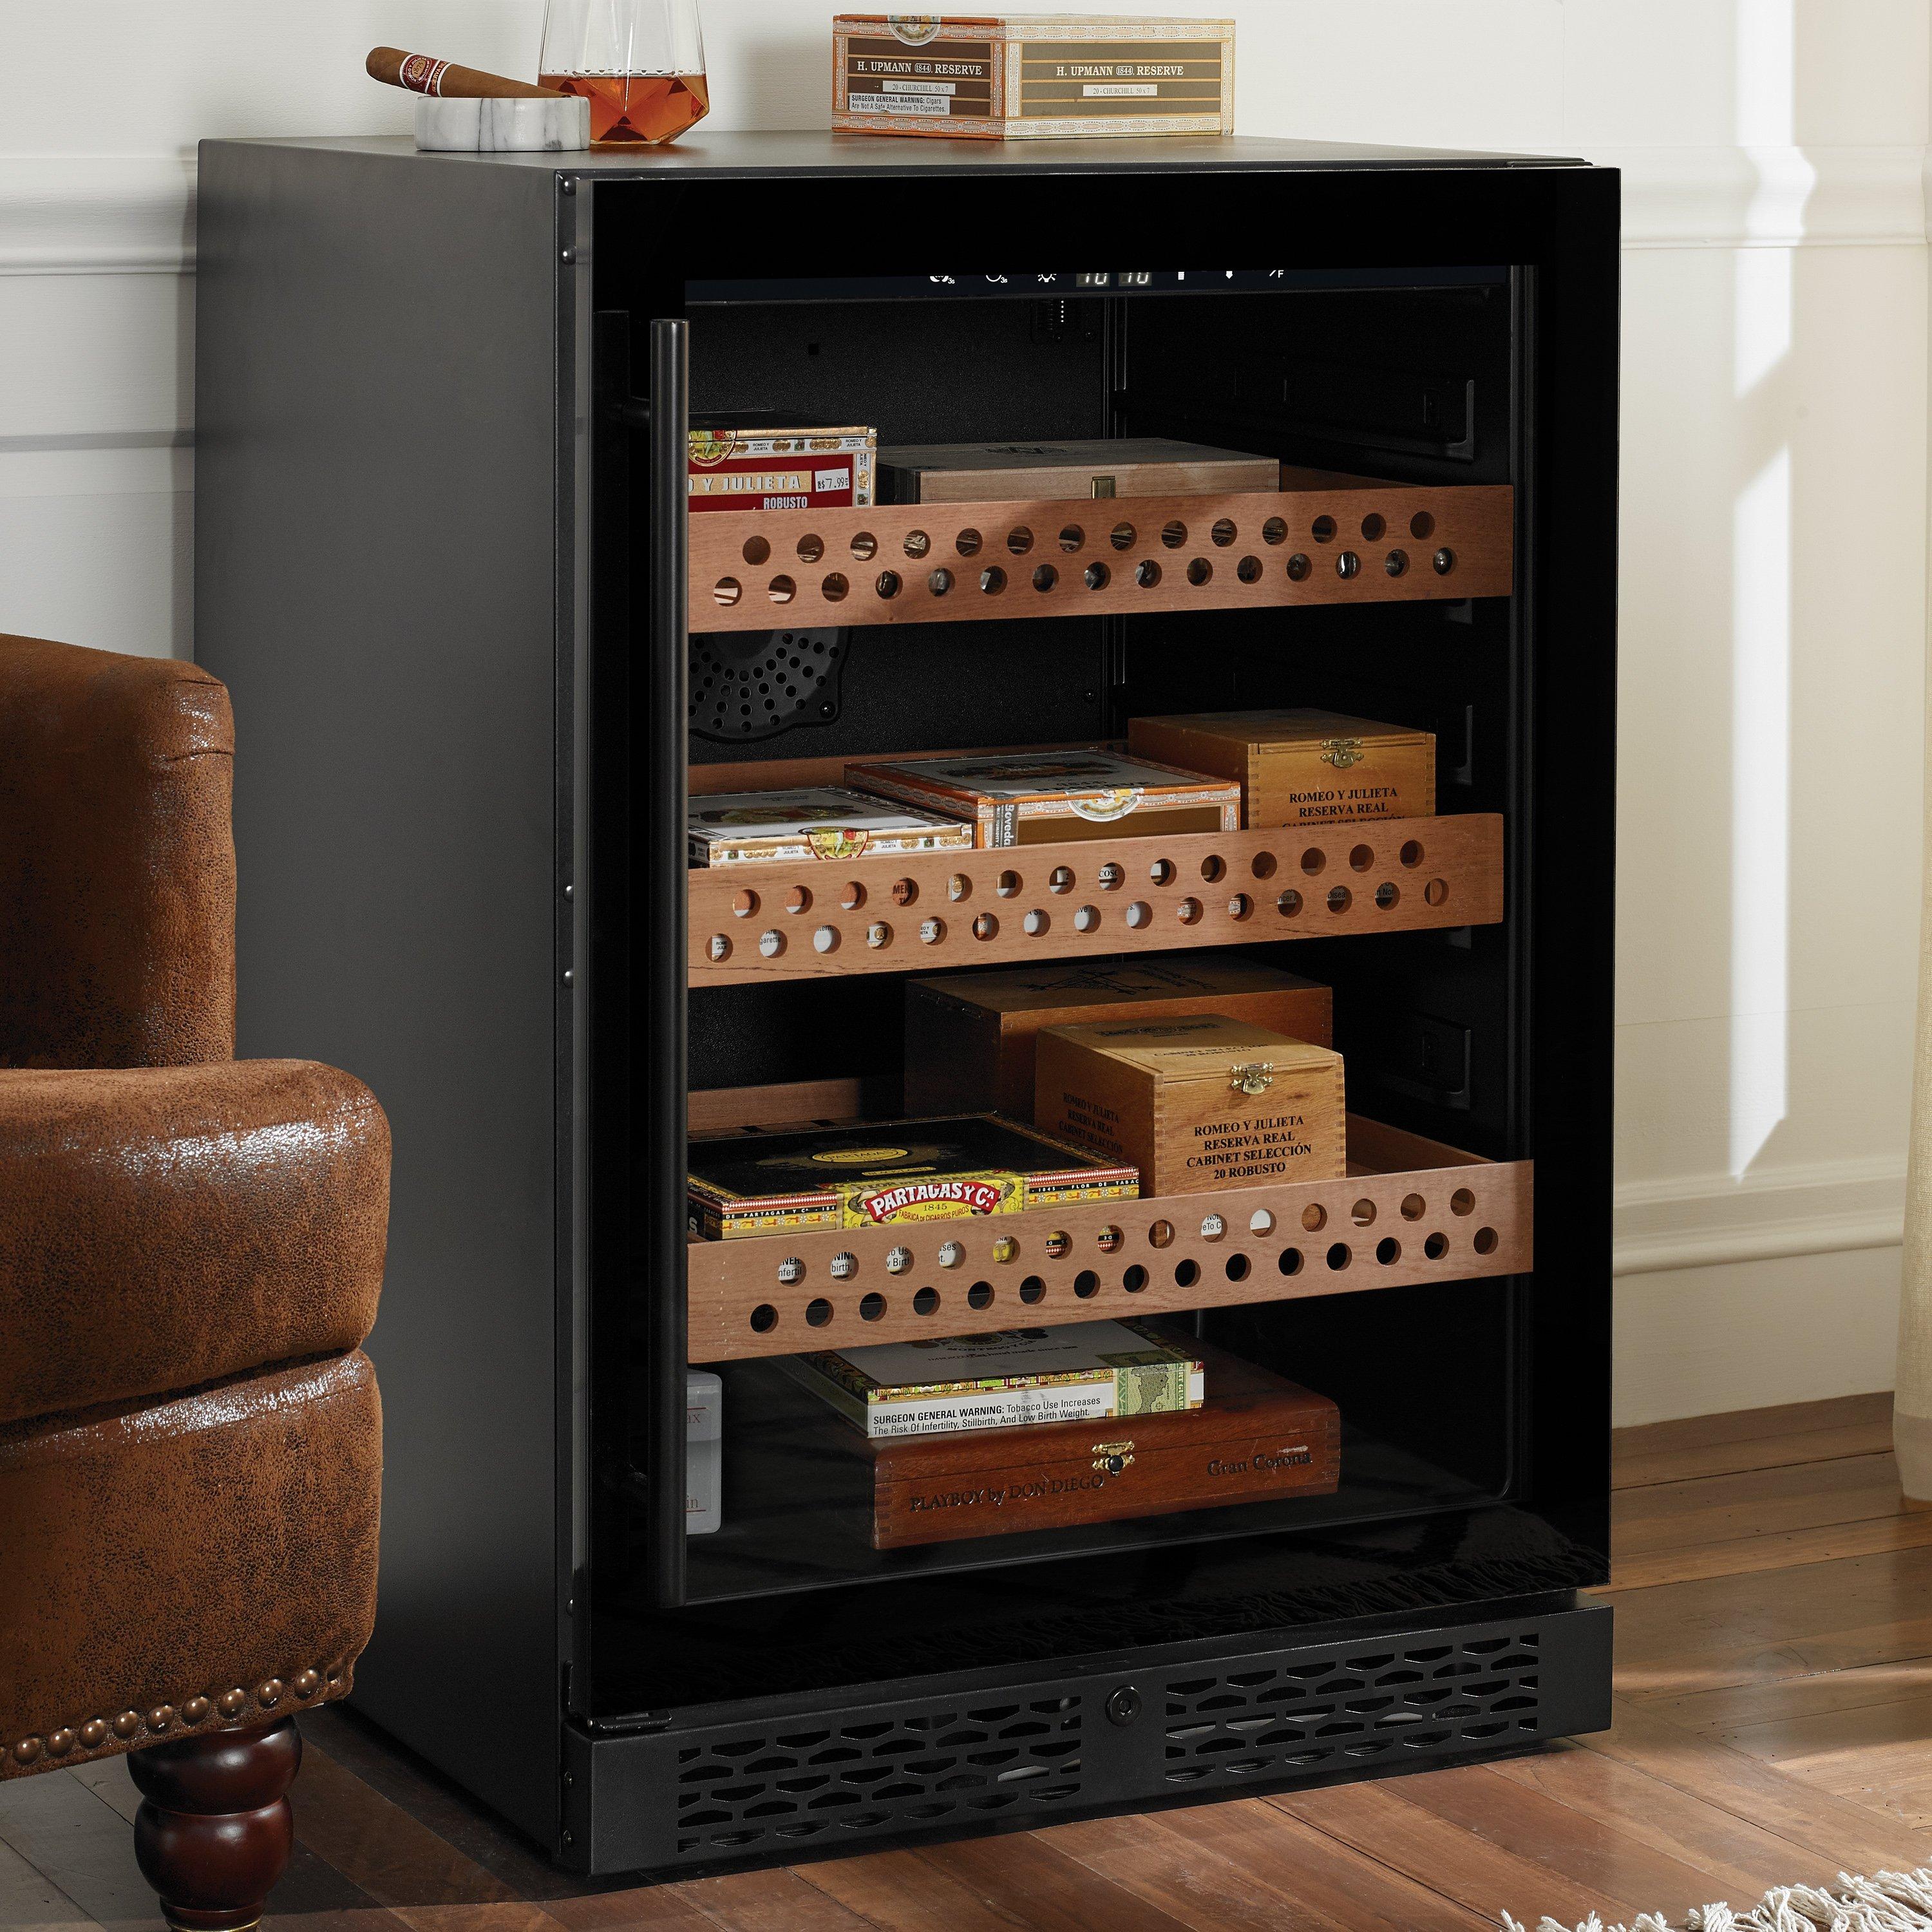 Cigar Humidors With A Modern Design That You Need to Discover